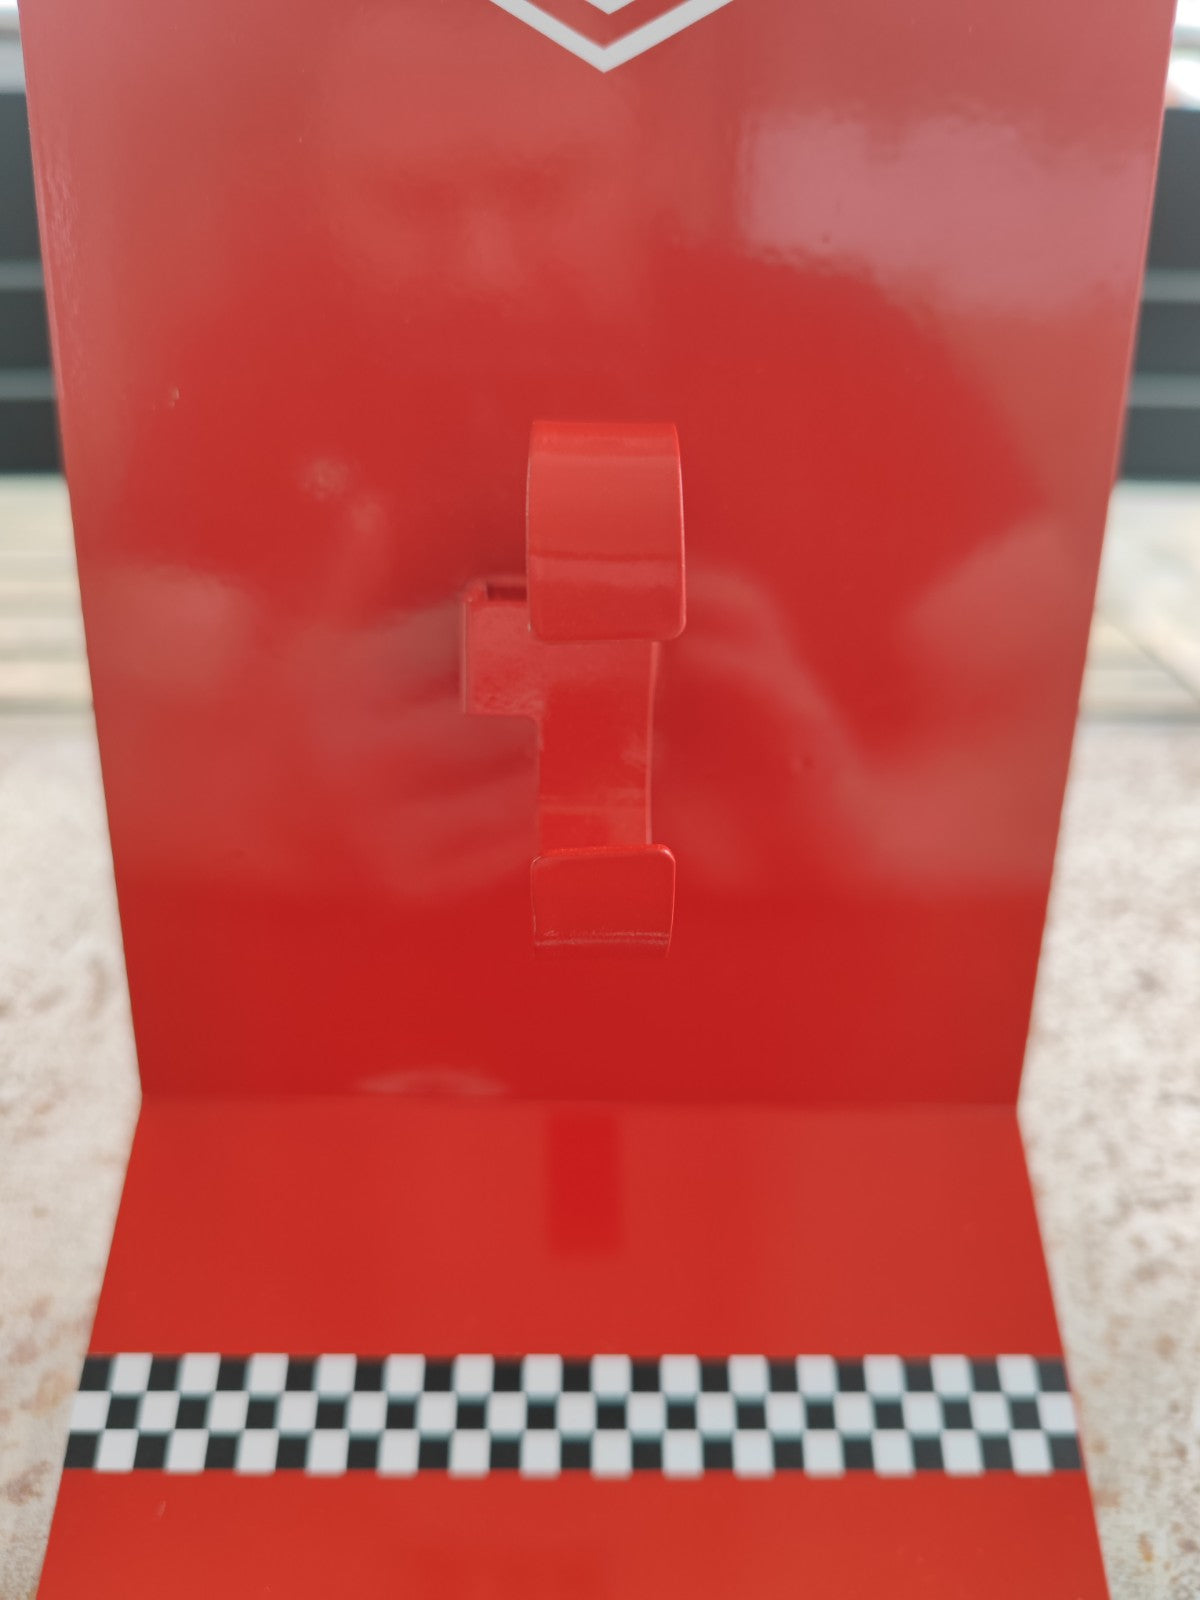 Rare Heuer Watch Stand with checkered flag